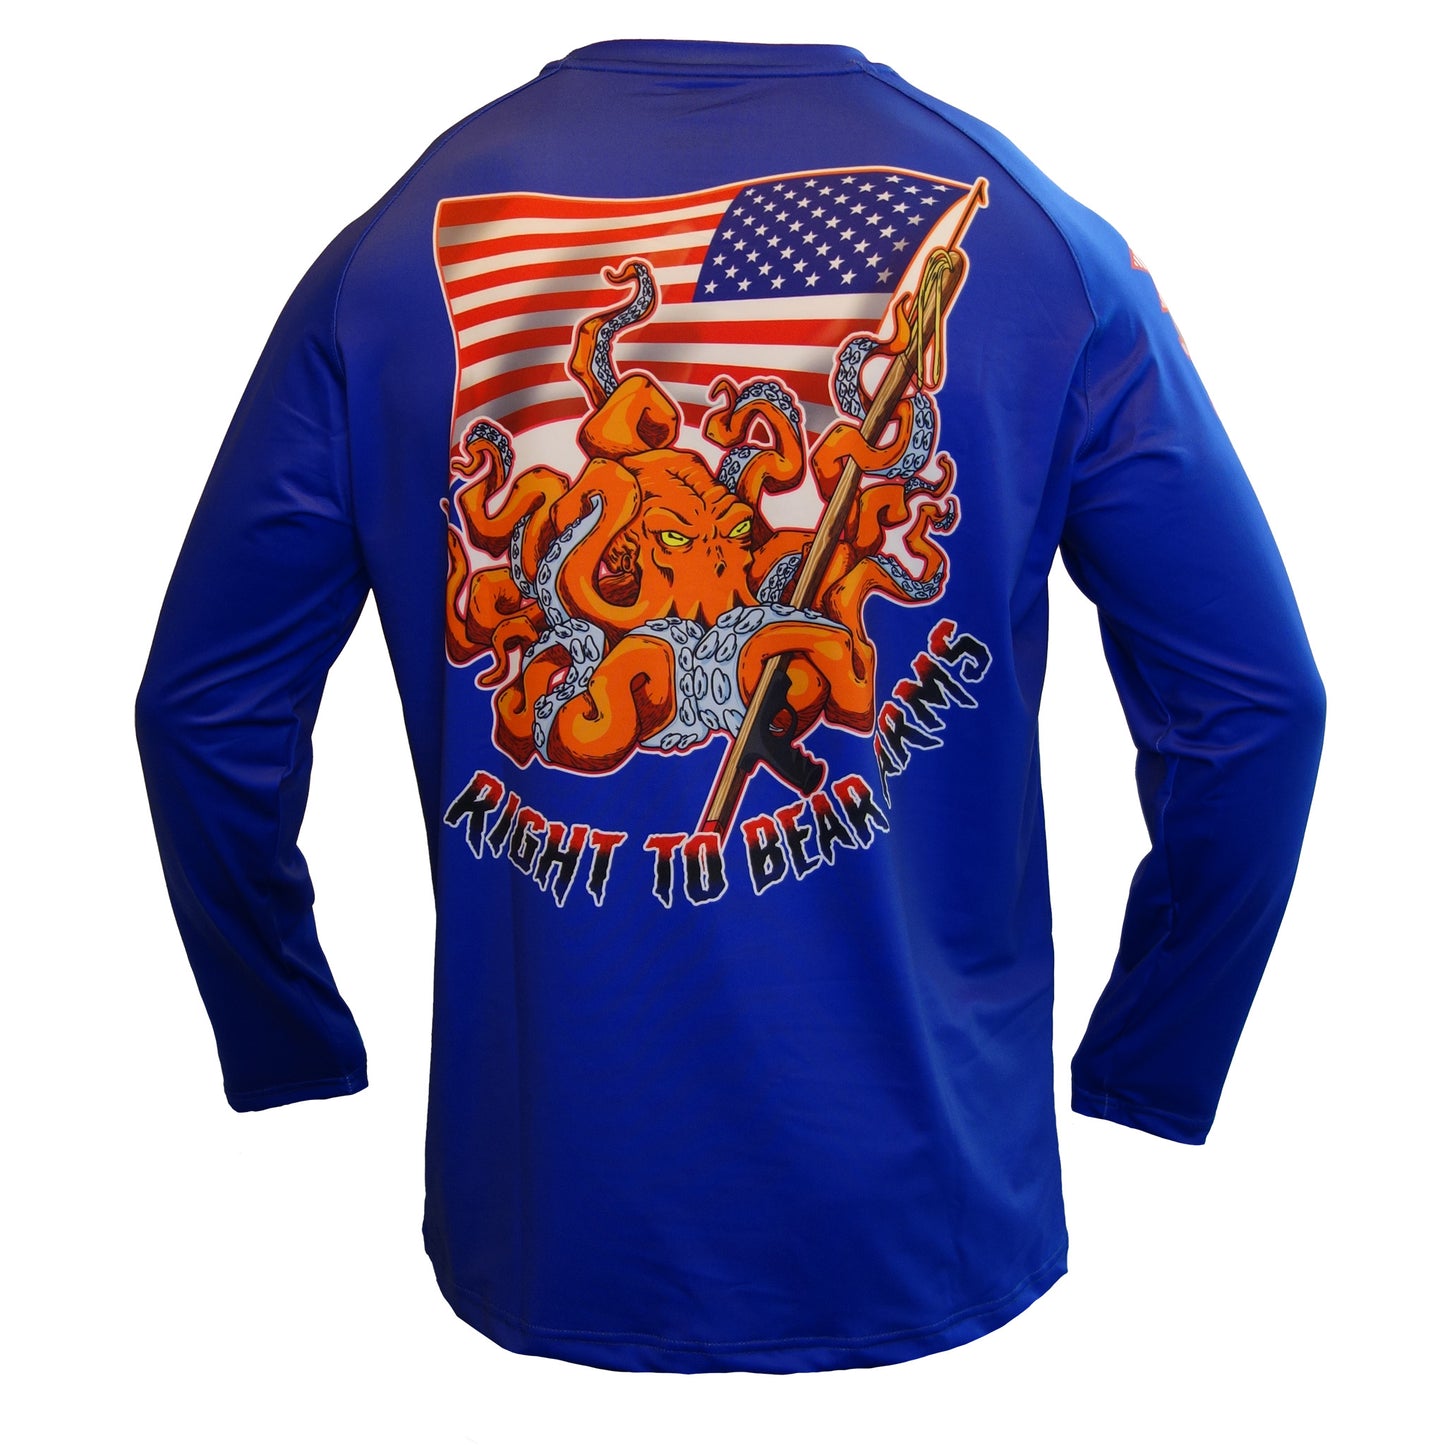 Right to Bear Arms Spear Fishing Shirt